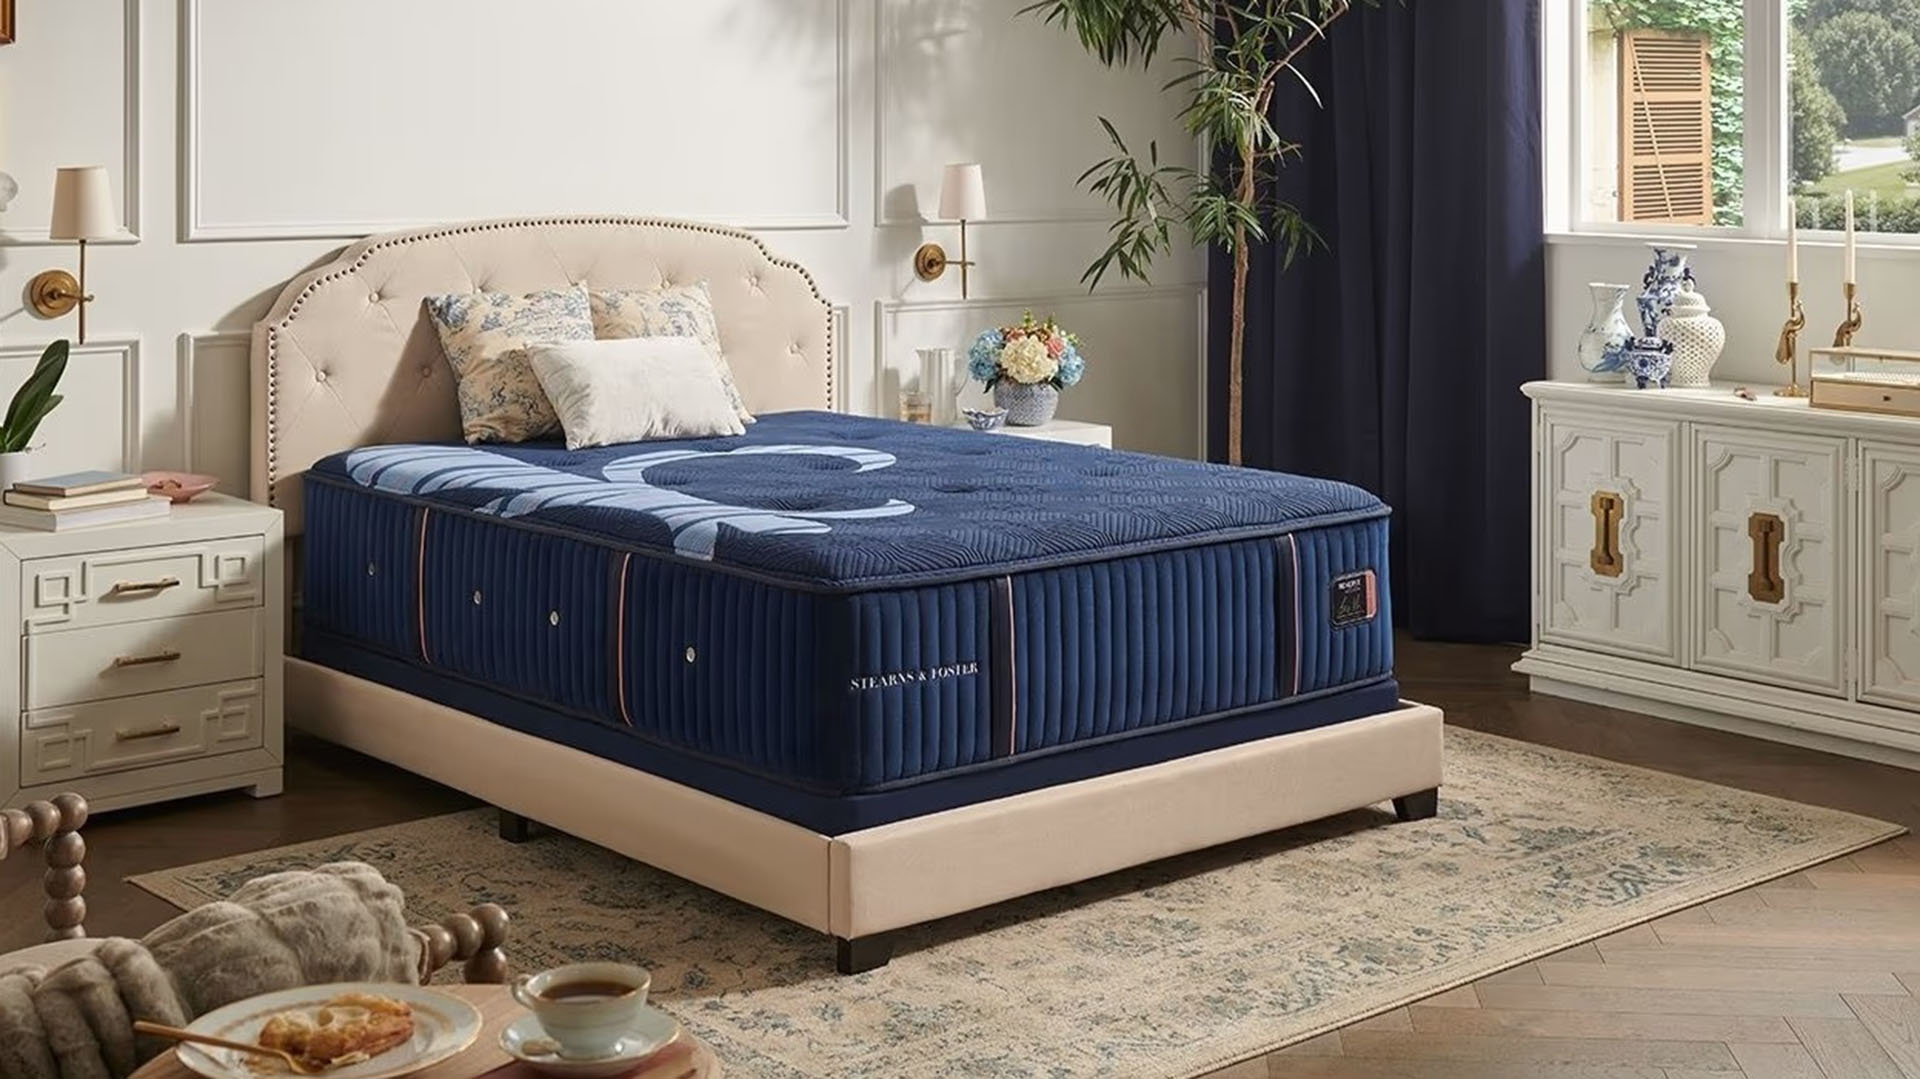 Stearns & Foster mattresses in Titusville are designed with comfort and support in mind.